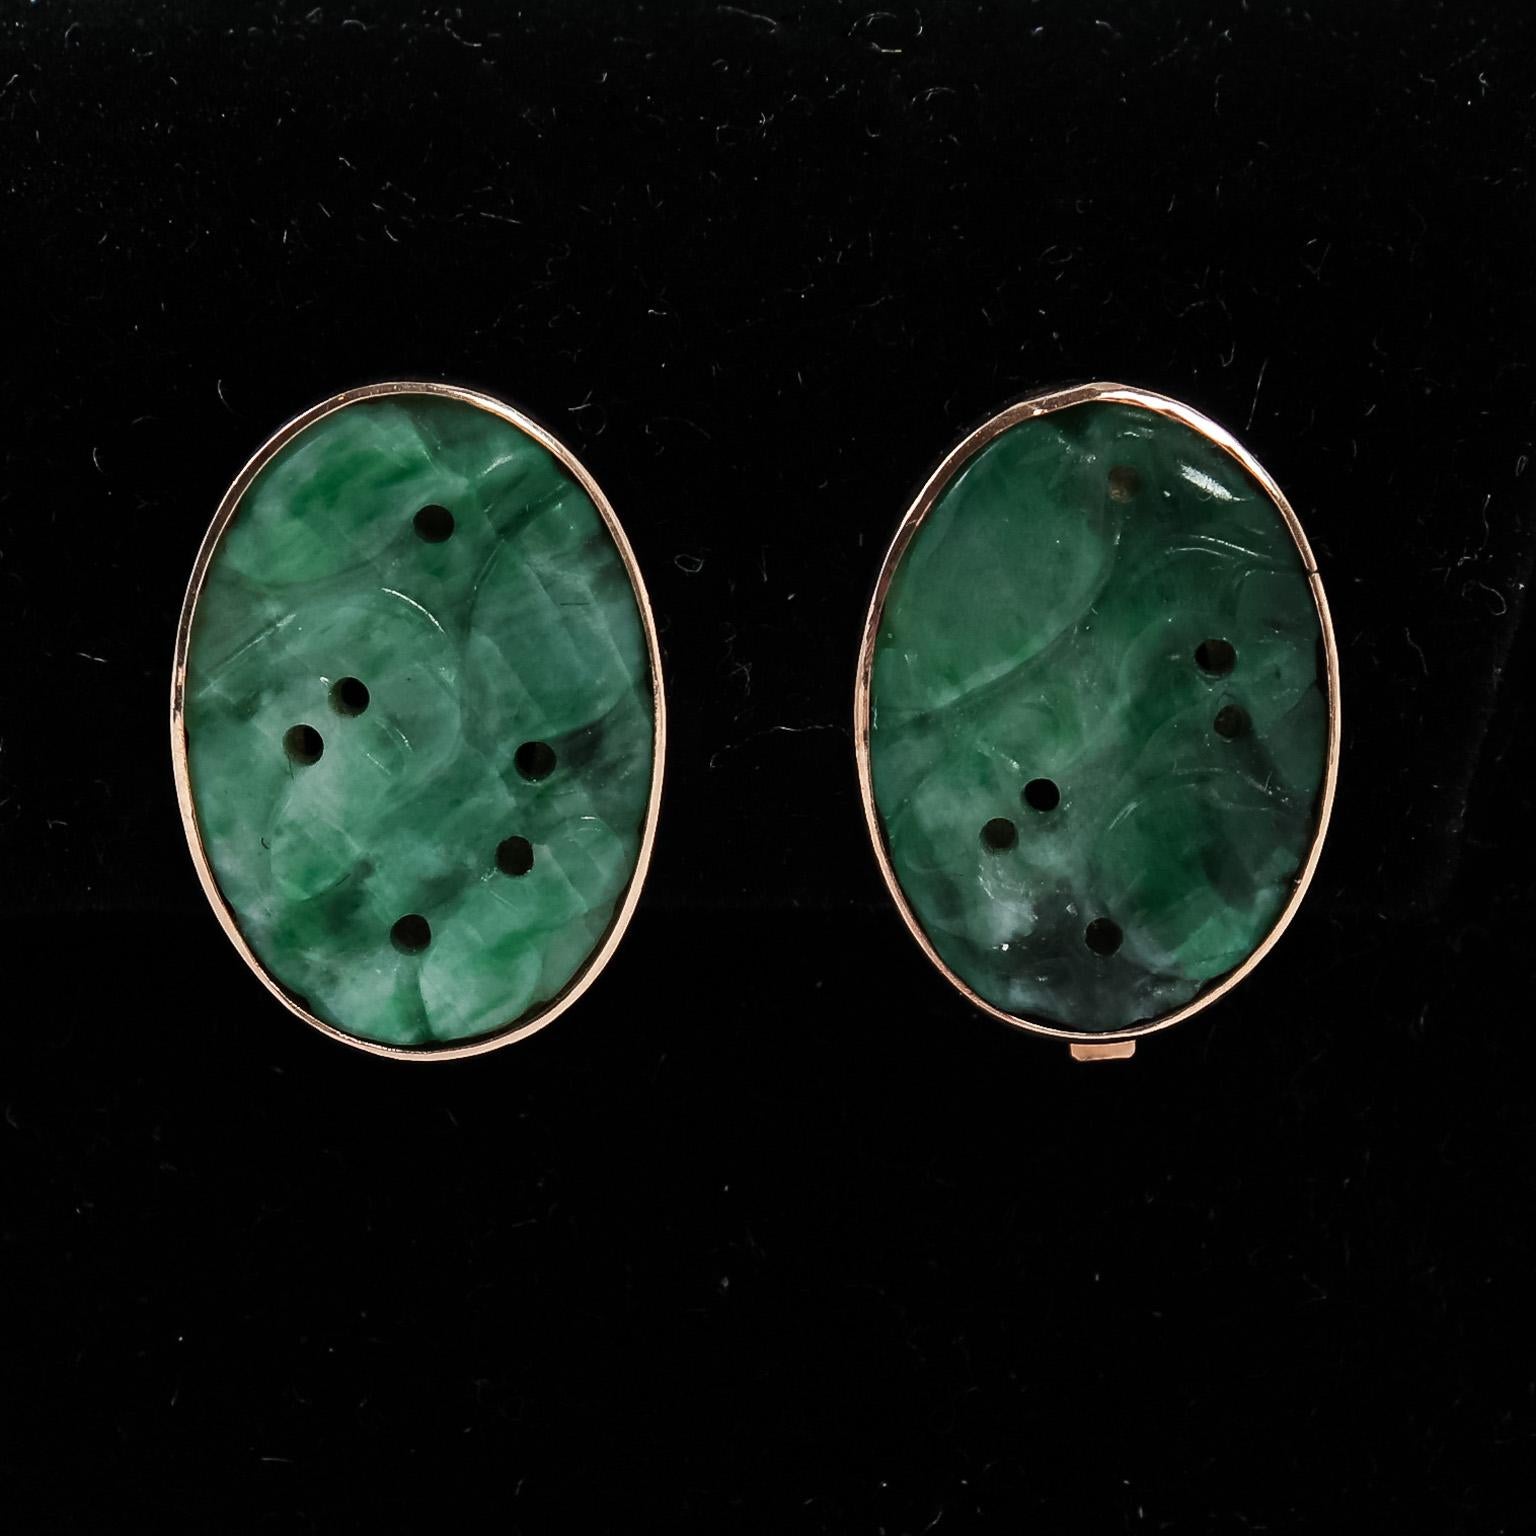 Circa 1960-1970s Pair of vintage clip on earrings constructed from solid 14 karat yellow gold. The stones are hand carved natural jadeite jade, most likely from China and made about 100 years ago. Signed 14K with a designer's mark that is not